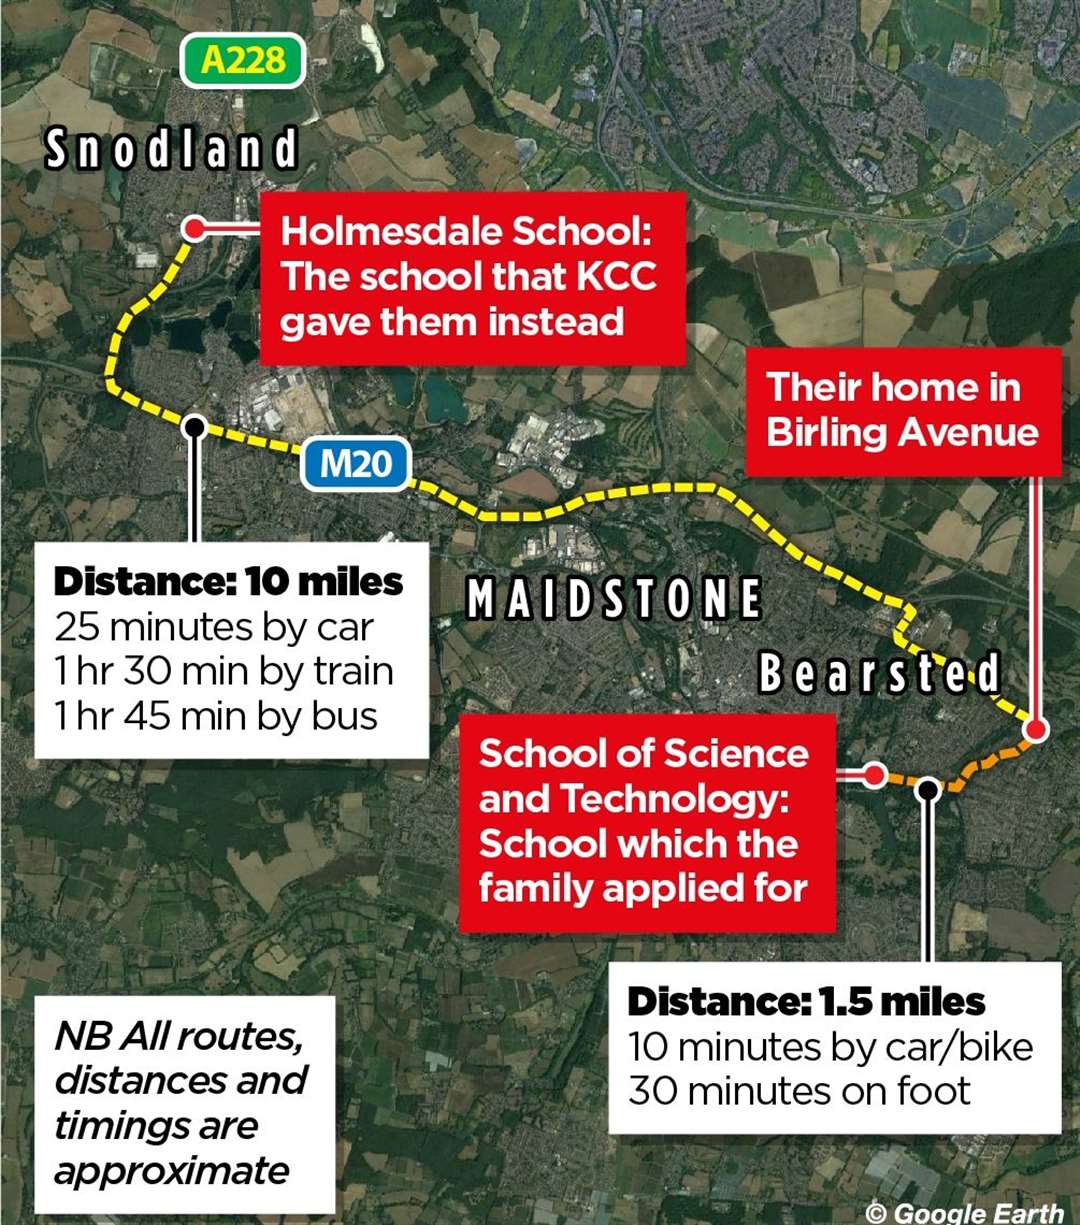 A map showing the distance between the family's home in Birling Avenue and the school in Snodland they were allocated instead of their first choice.